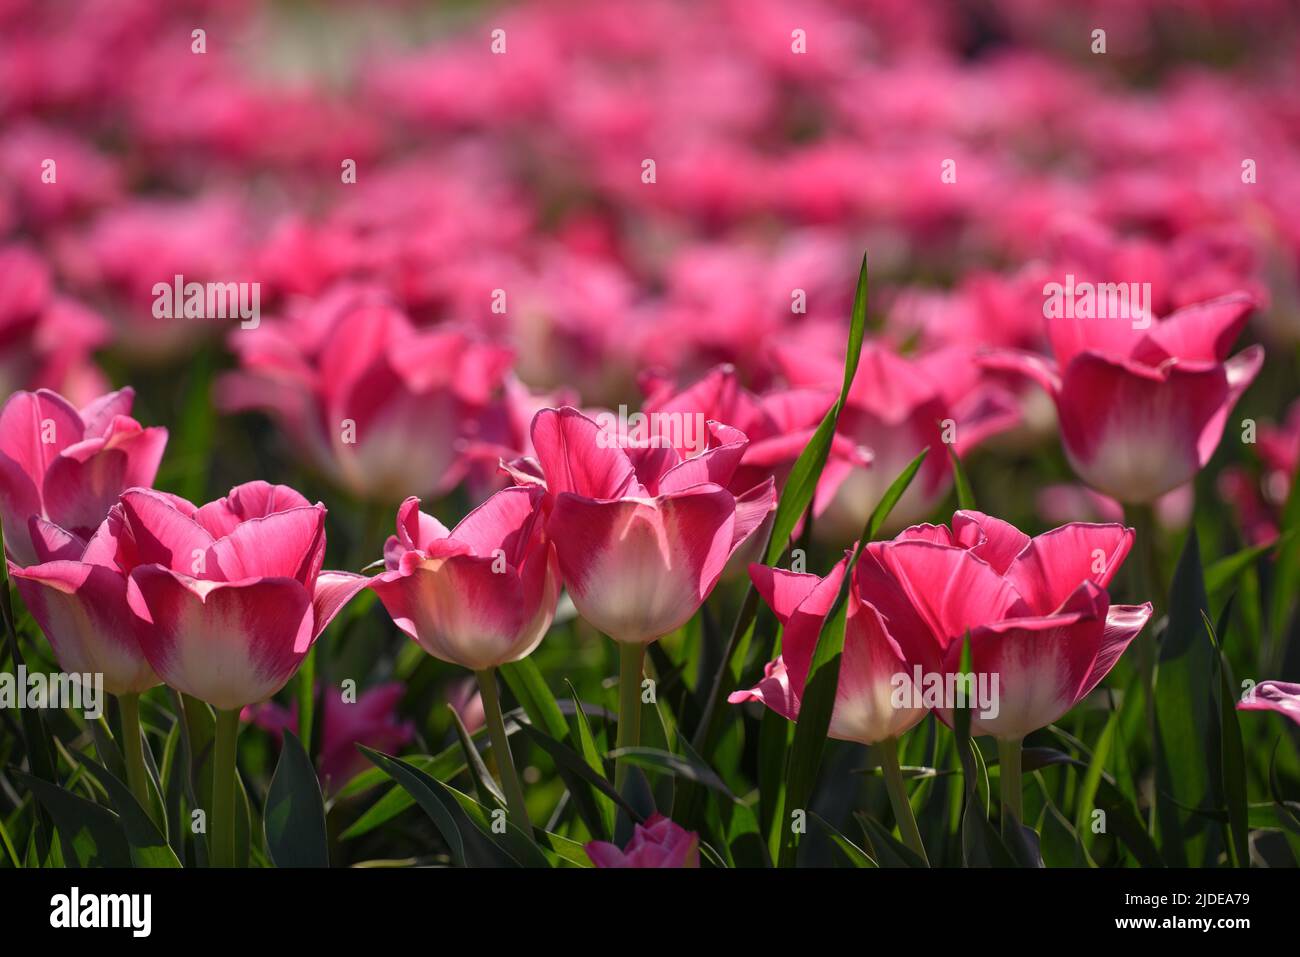 View of pink tulips with blurred tulips on the background. Stock Photo